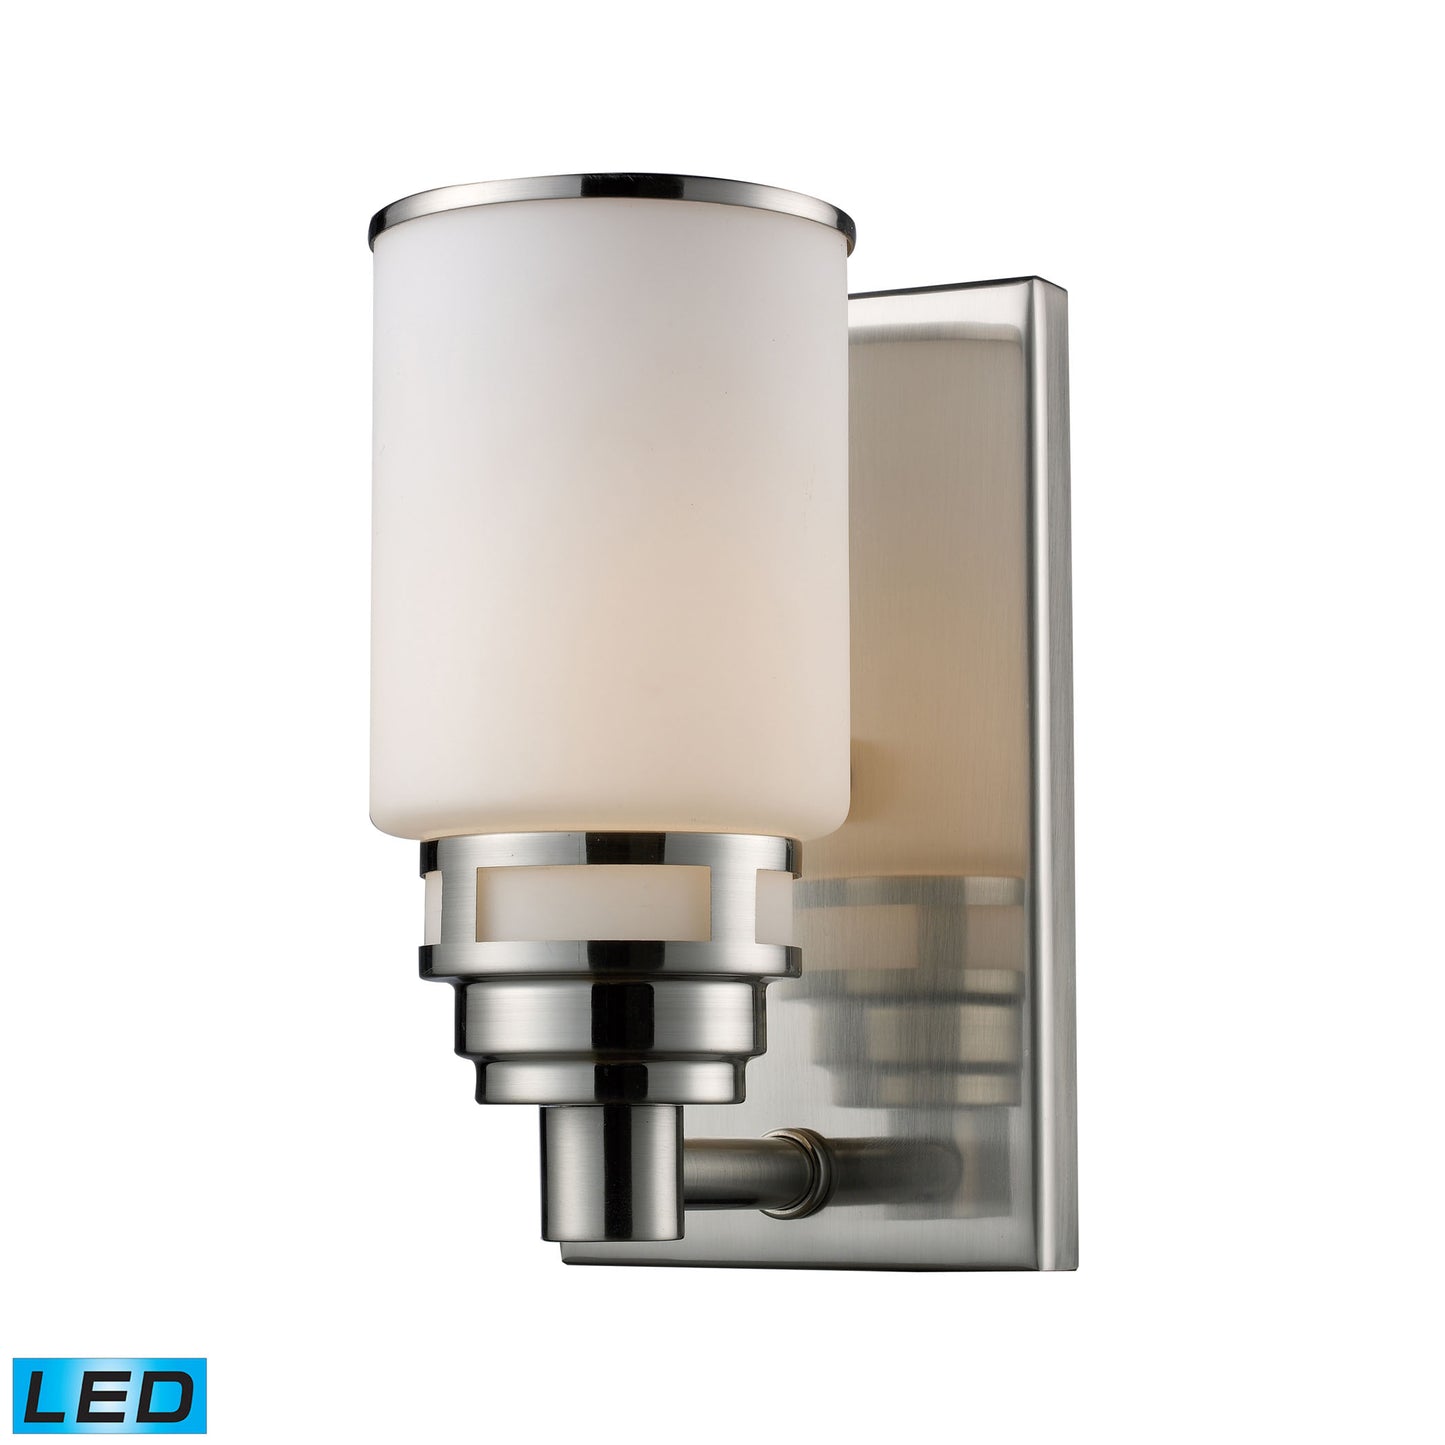 Bryant 1-Light Vanity Lamp in Satin Nickel with Opal White Glass - Includes LED Bulb